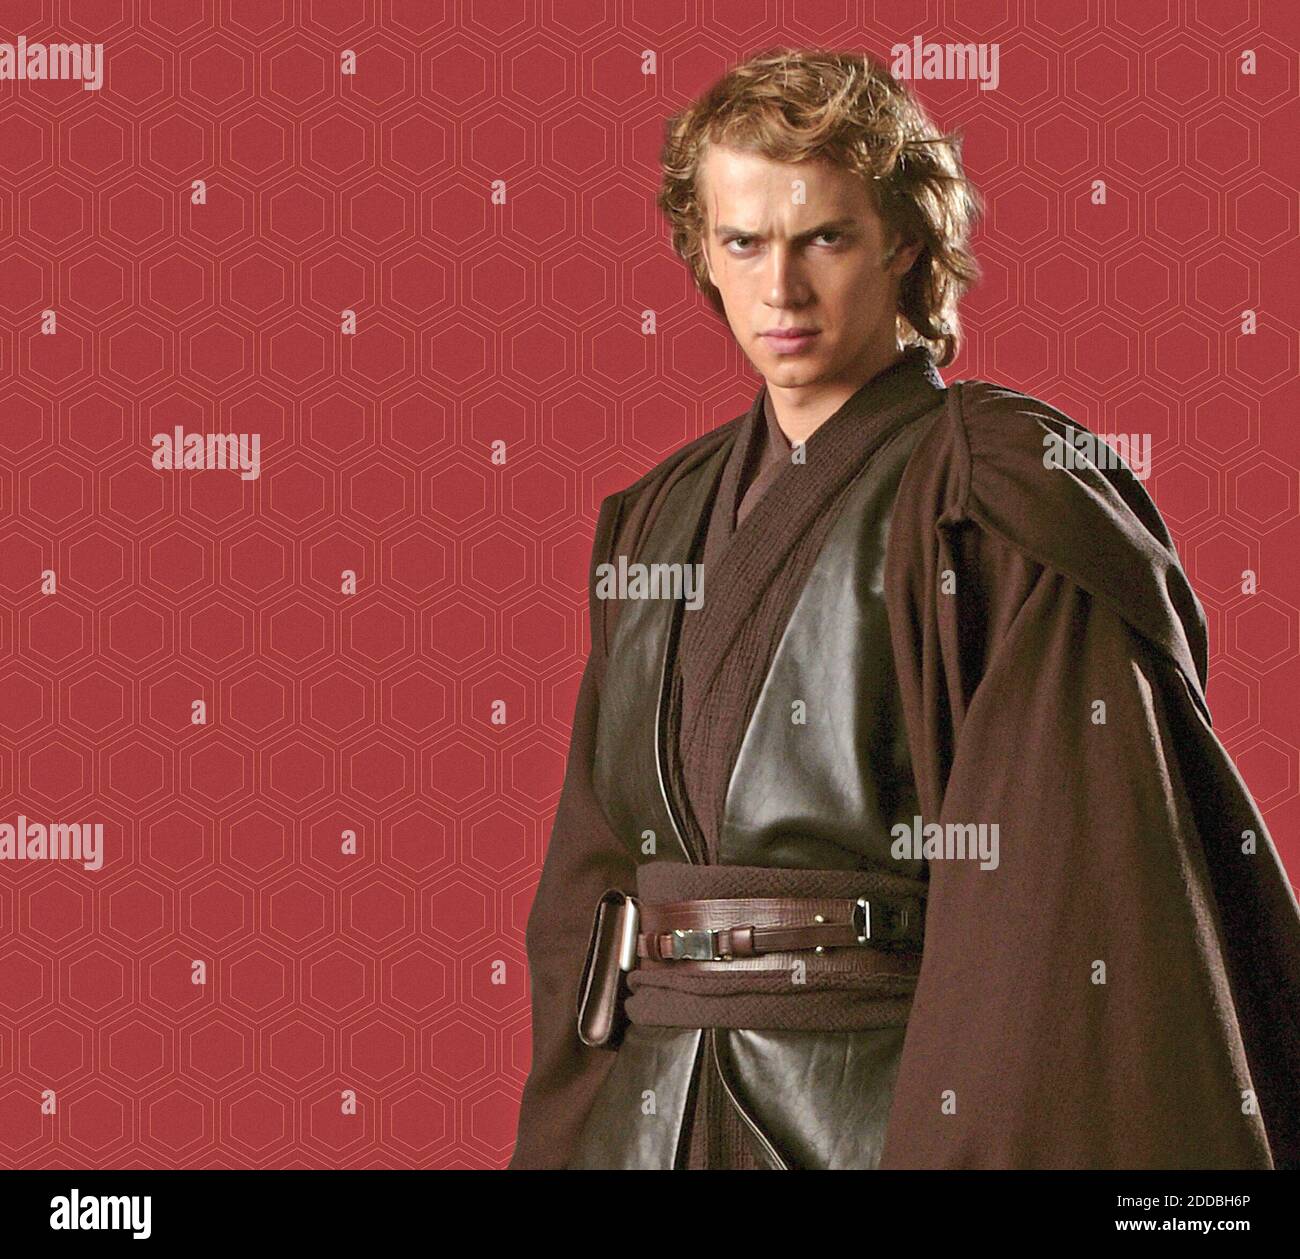 NO FILM, NO VIDEO, NO TV, NO DOCUMENTARY - Anakin Skywalker (Hayden  Christensen) in a standard Jedi tunic. The dark color expresses his  independence from the Jedi Council, in Star Wars. Photo